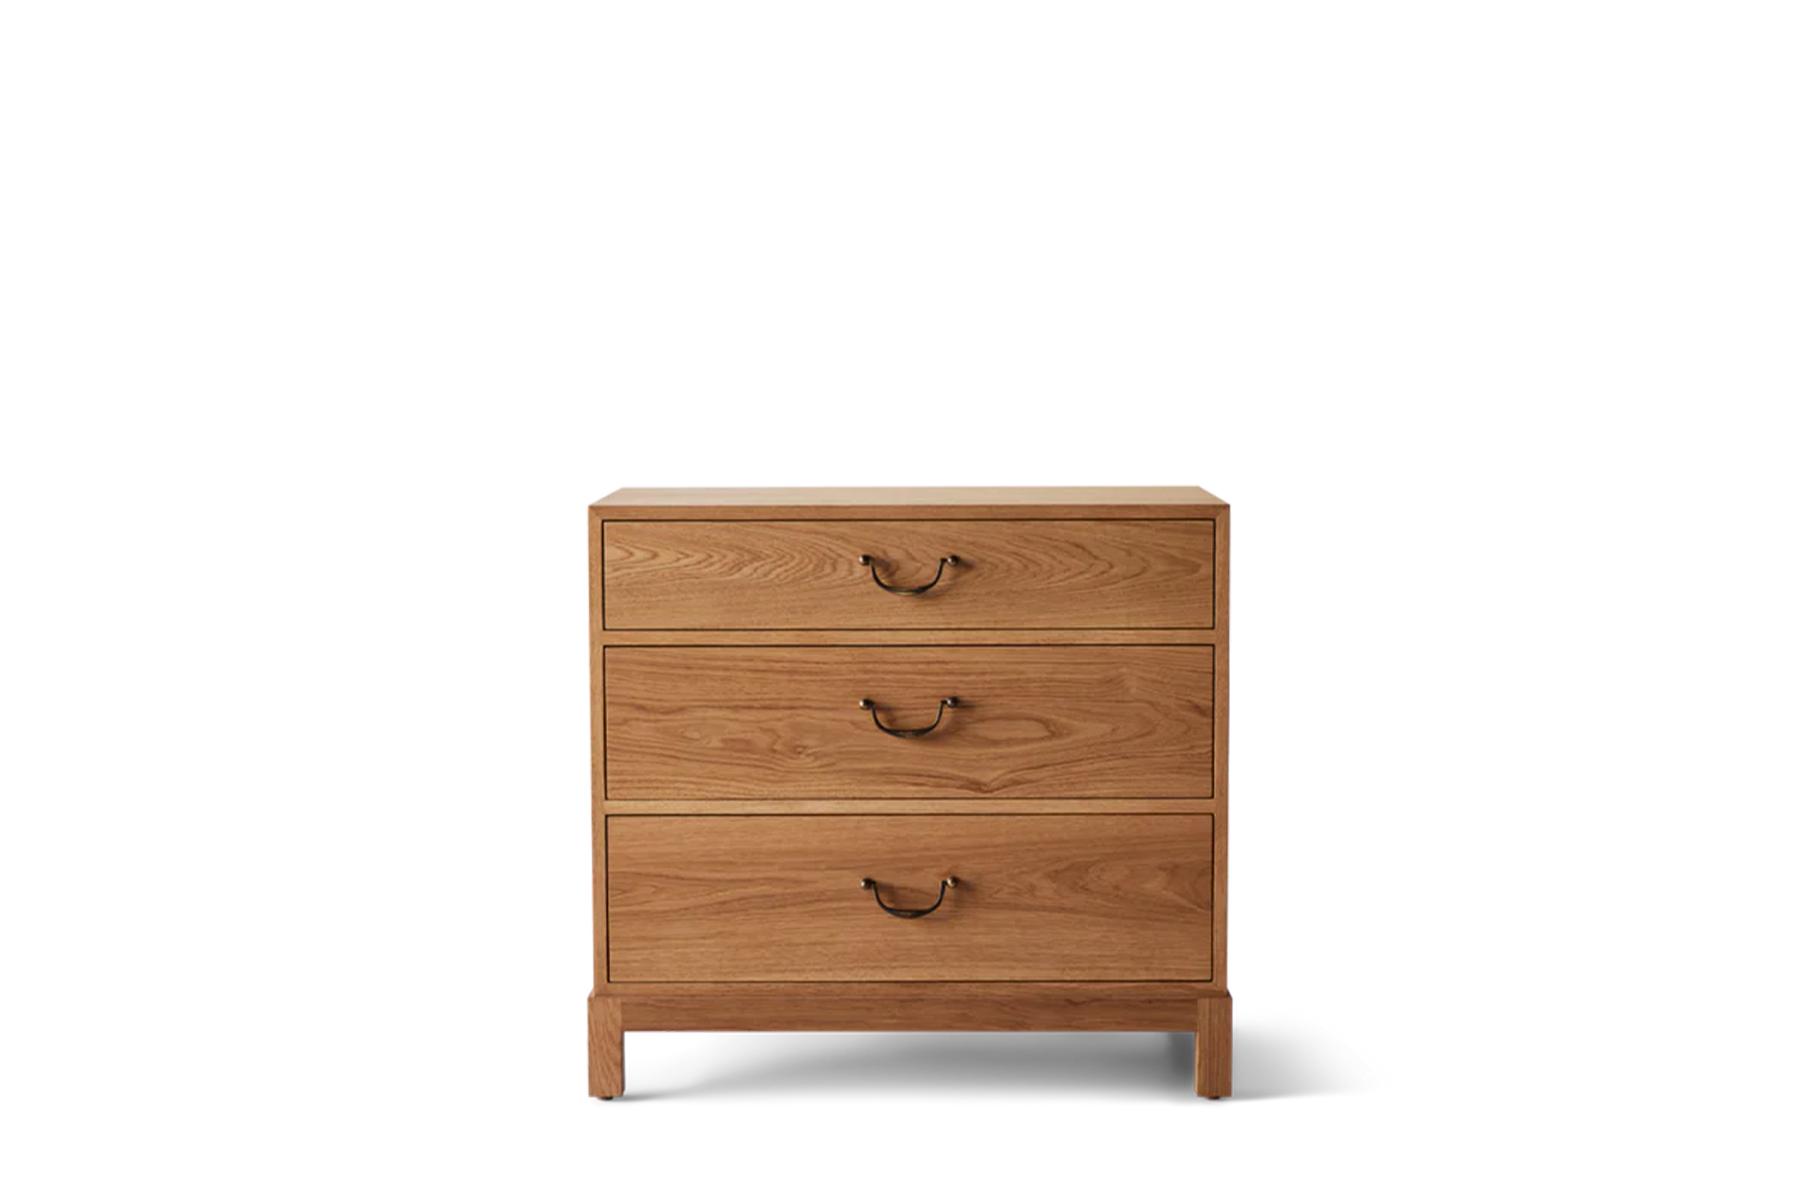 Nickey Kehoe Campaign Chest, 28"